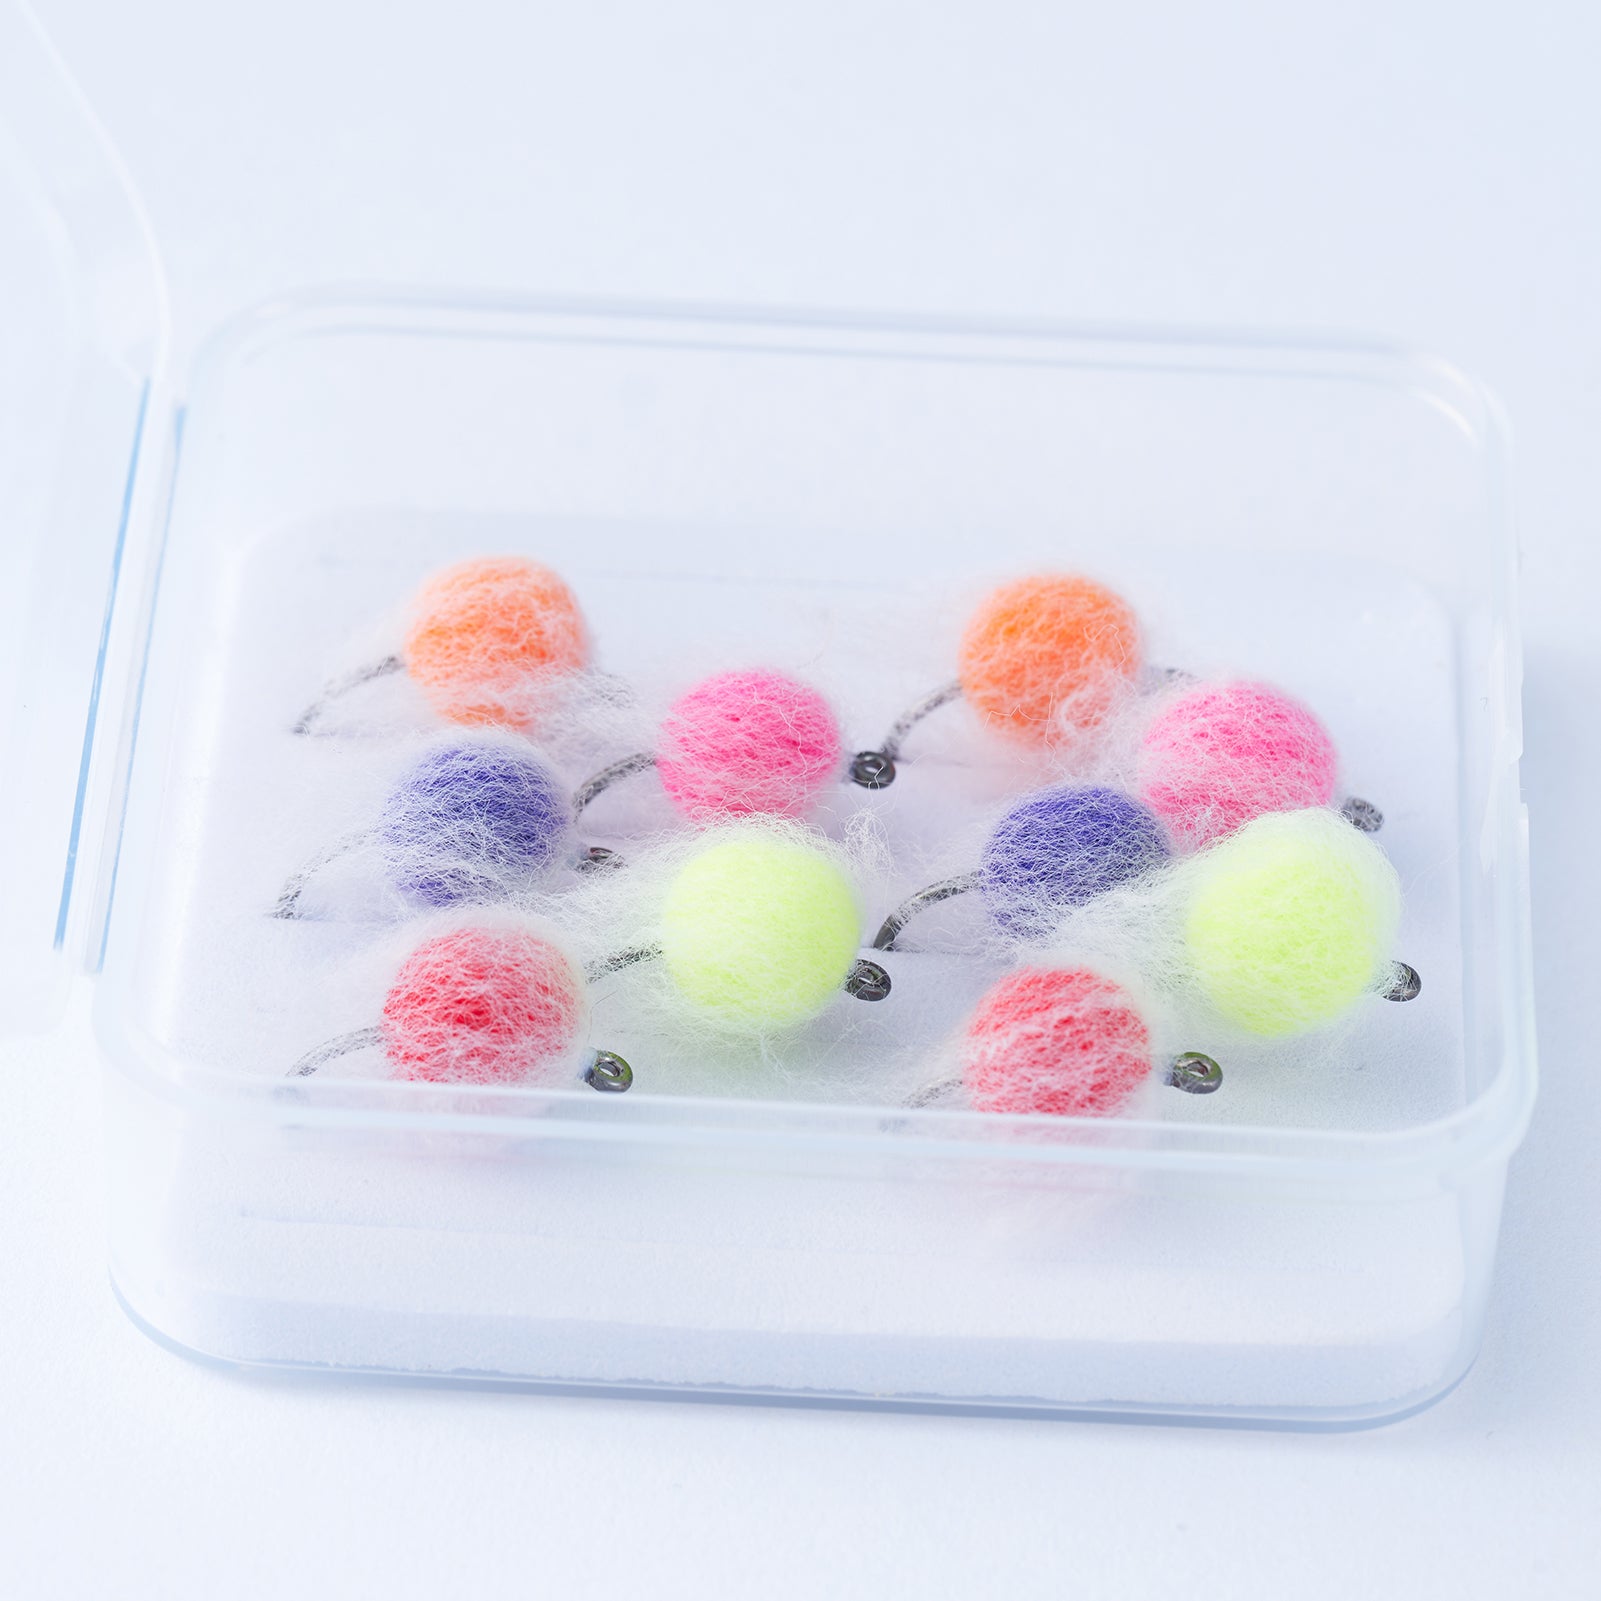 BASSDASH Trout Steelhead Salmon Fishing Flies Barbed Barbless Fly Hooks Include Dry Wet Flies Nymphs Streamers Eggs, Fly Lure Kit With Fly Box